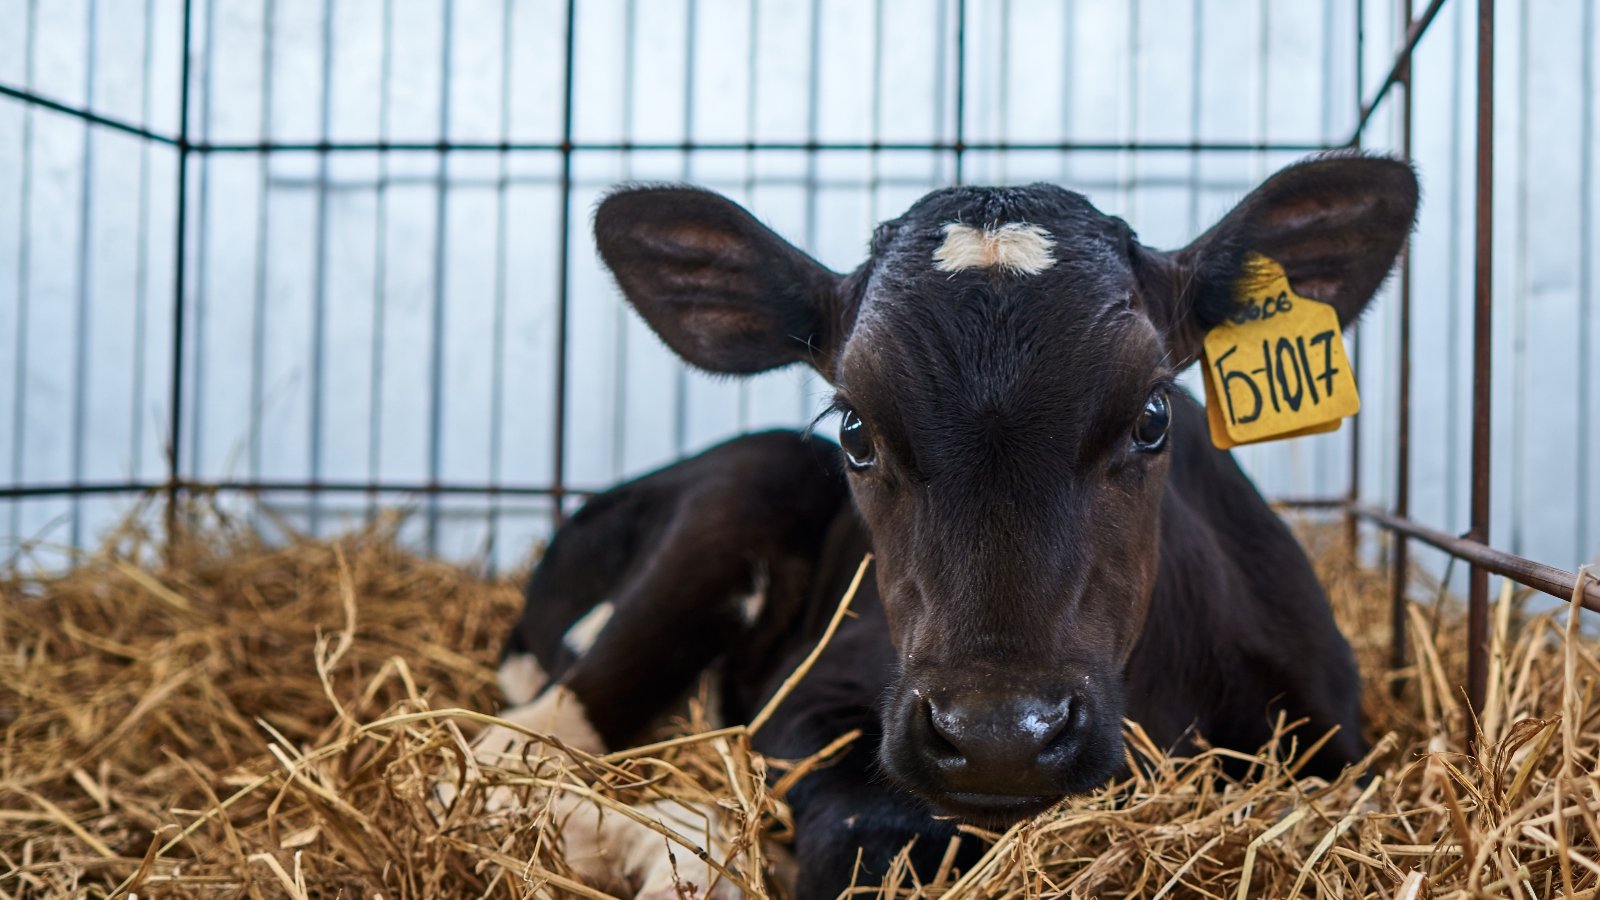 New Exposé Uncovers 'Heartbreaking' Treatment Of 3-Day-Old Calves At Organic Dairy Farm